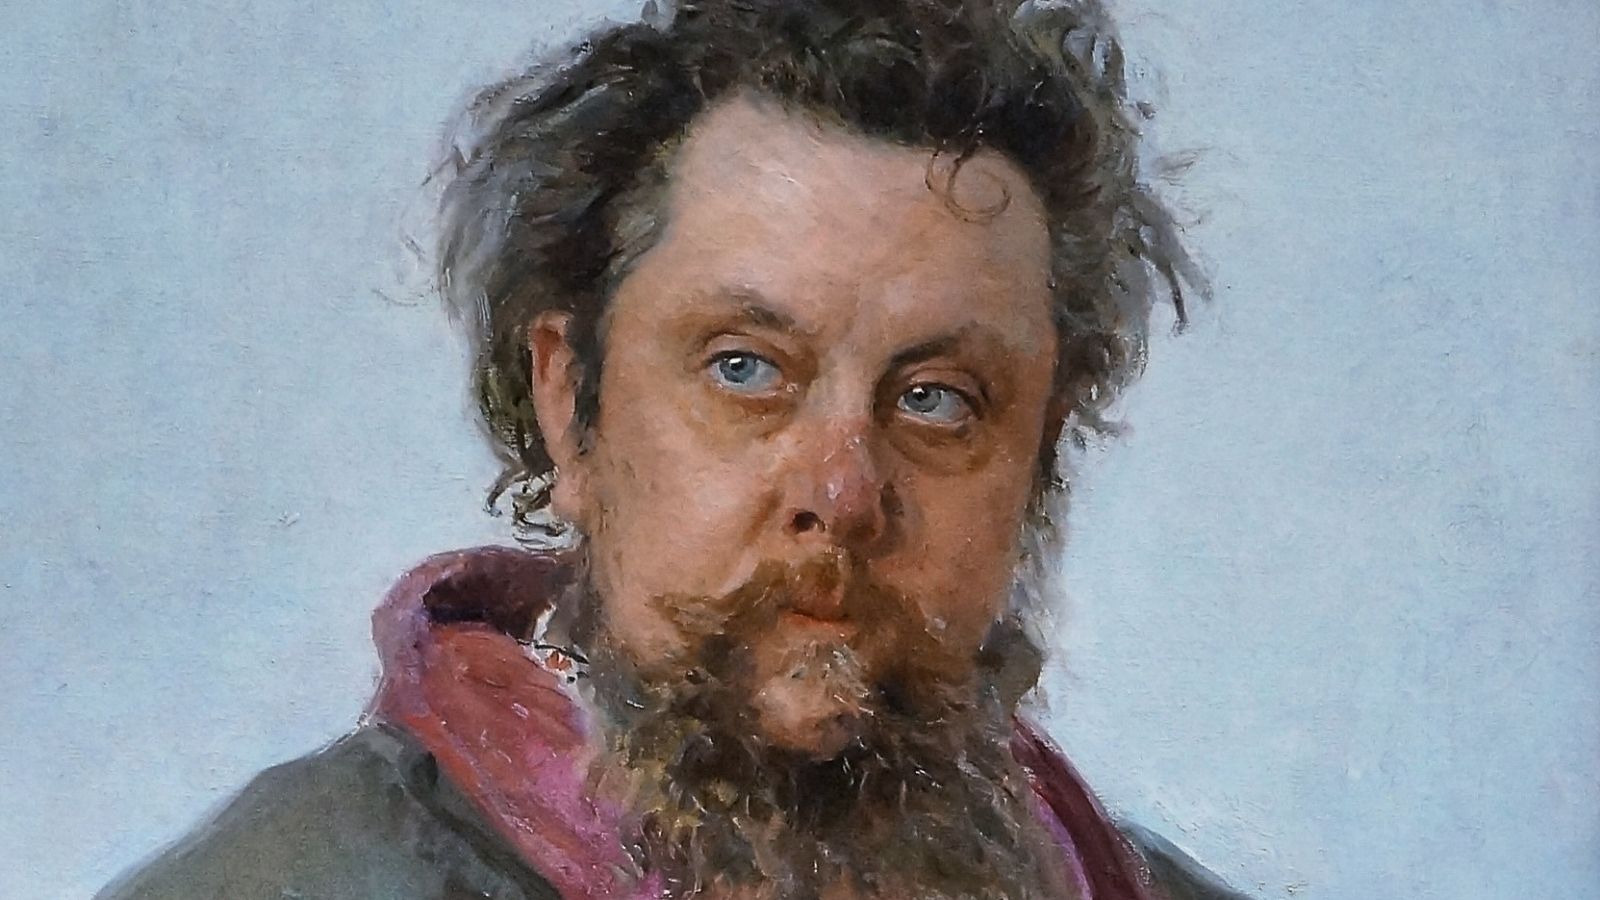 Who Was The Composer Of Pictures At An Exhibition And The Opera Boris Godunov?